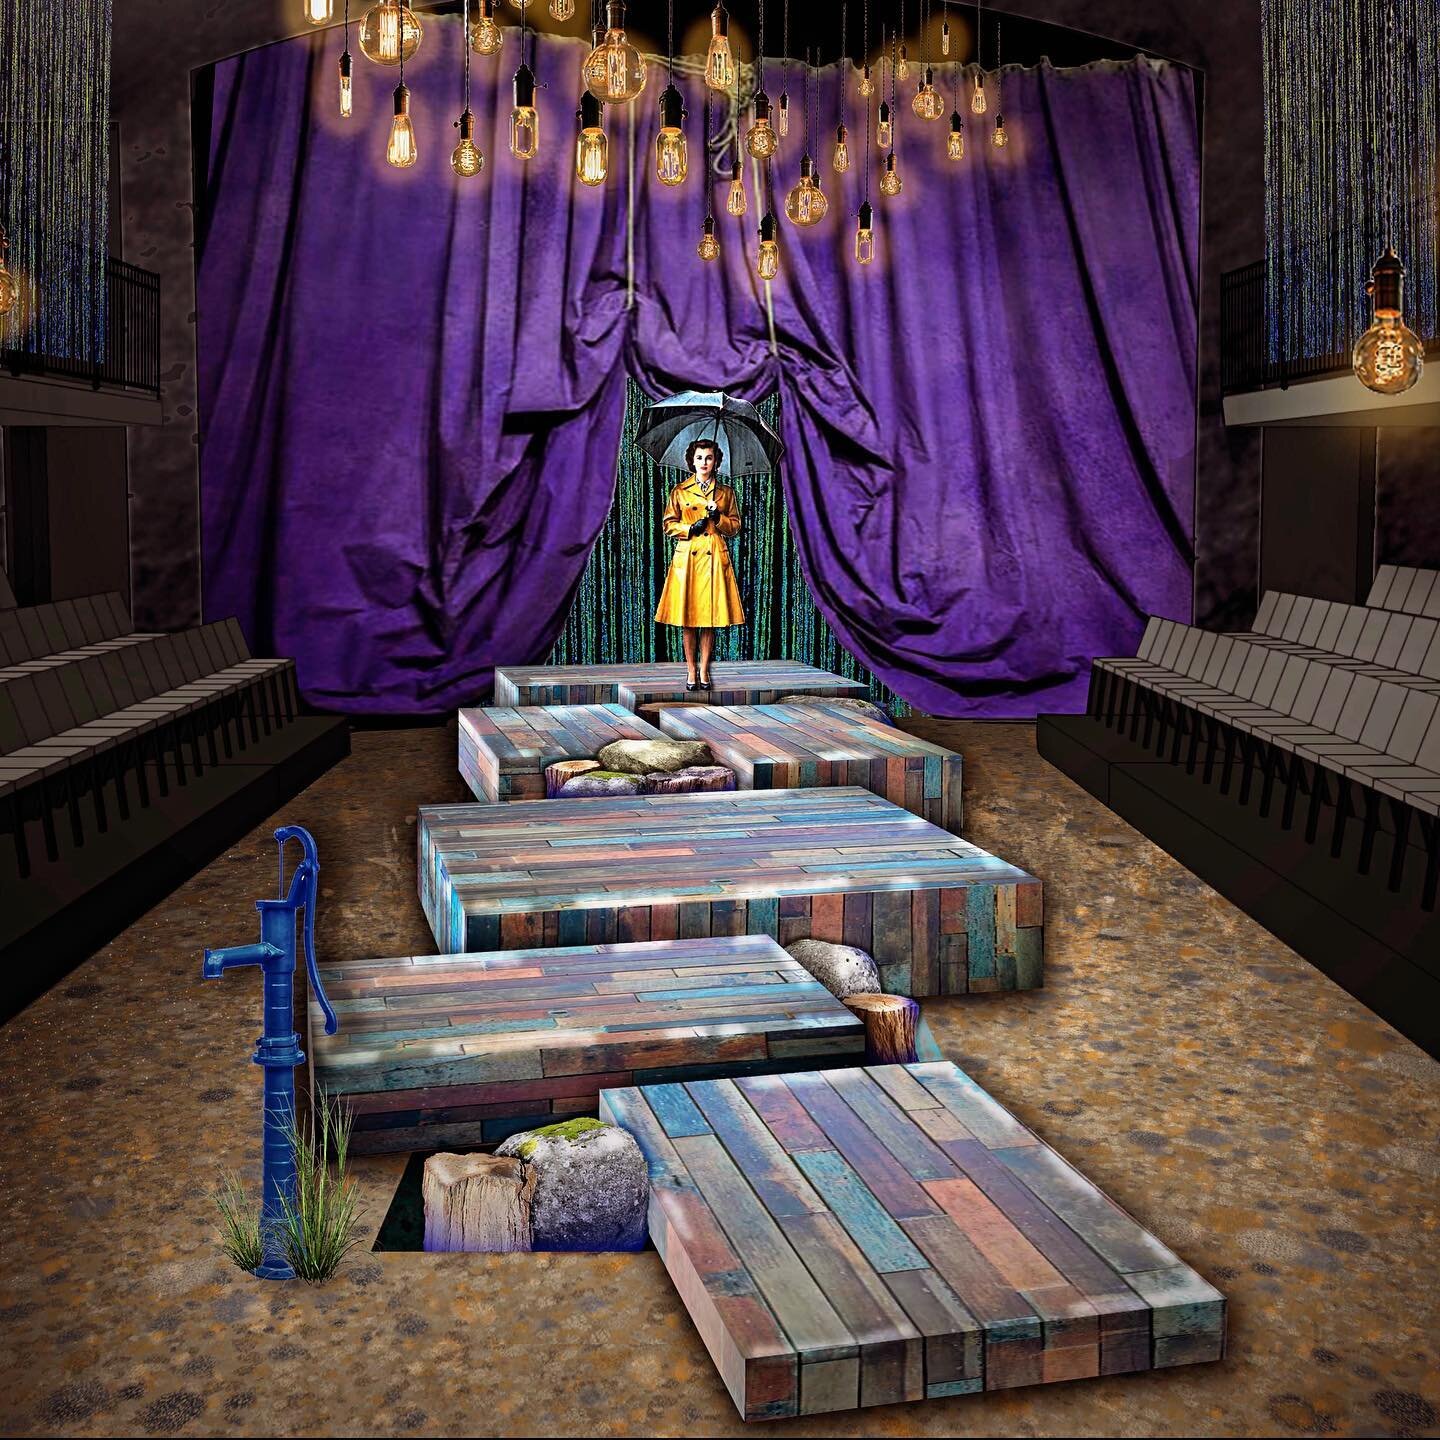 Eurydice by Sarah Ruhl. Just love how this rendering turned out! #scenicdesign #scenicrendering #eurydice #theatre